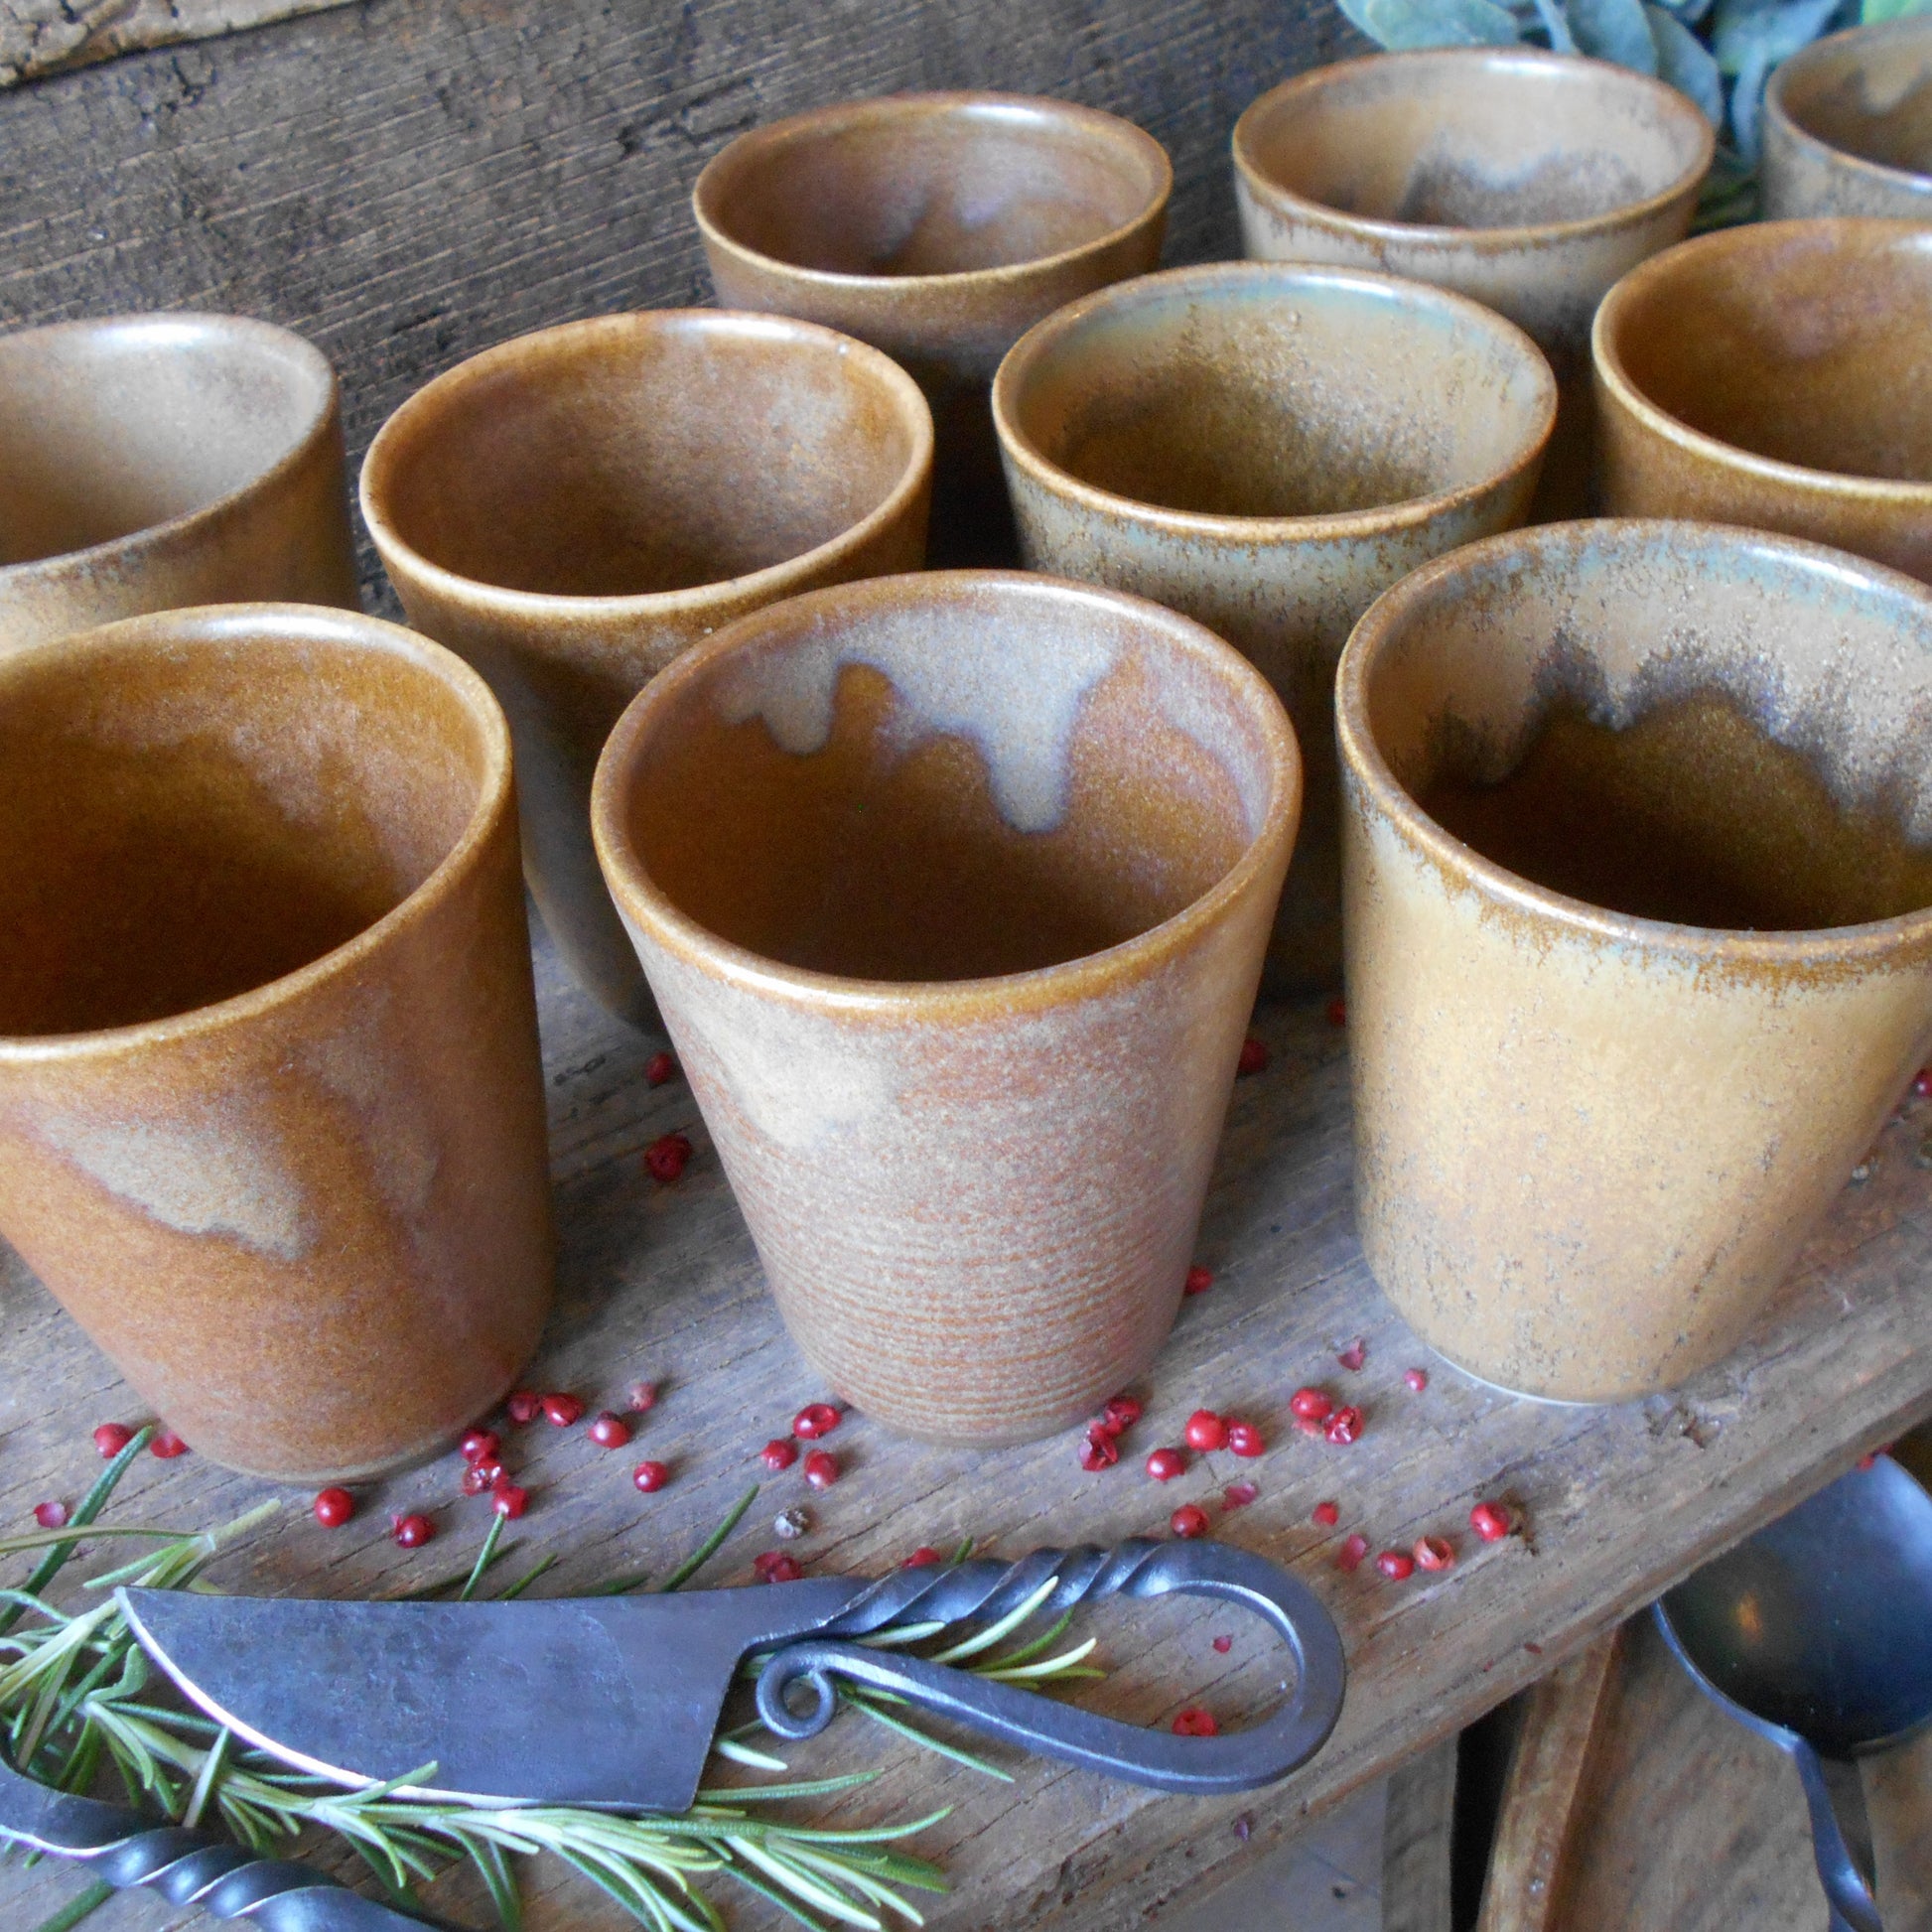 Ten Digoin Stoneware Tumblers. Medieval Re-enactment Pottery Goblets. from Tiggy & Pip - €120.00! Shop now at Tiggy and Pip